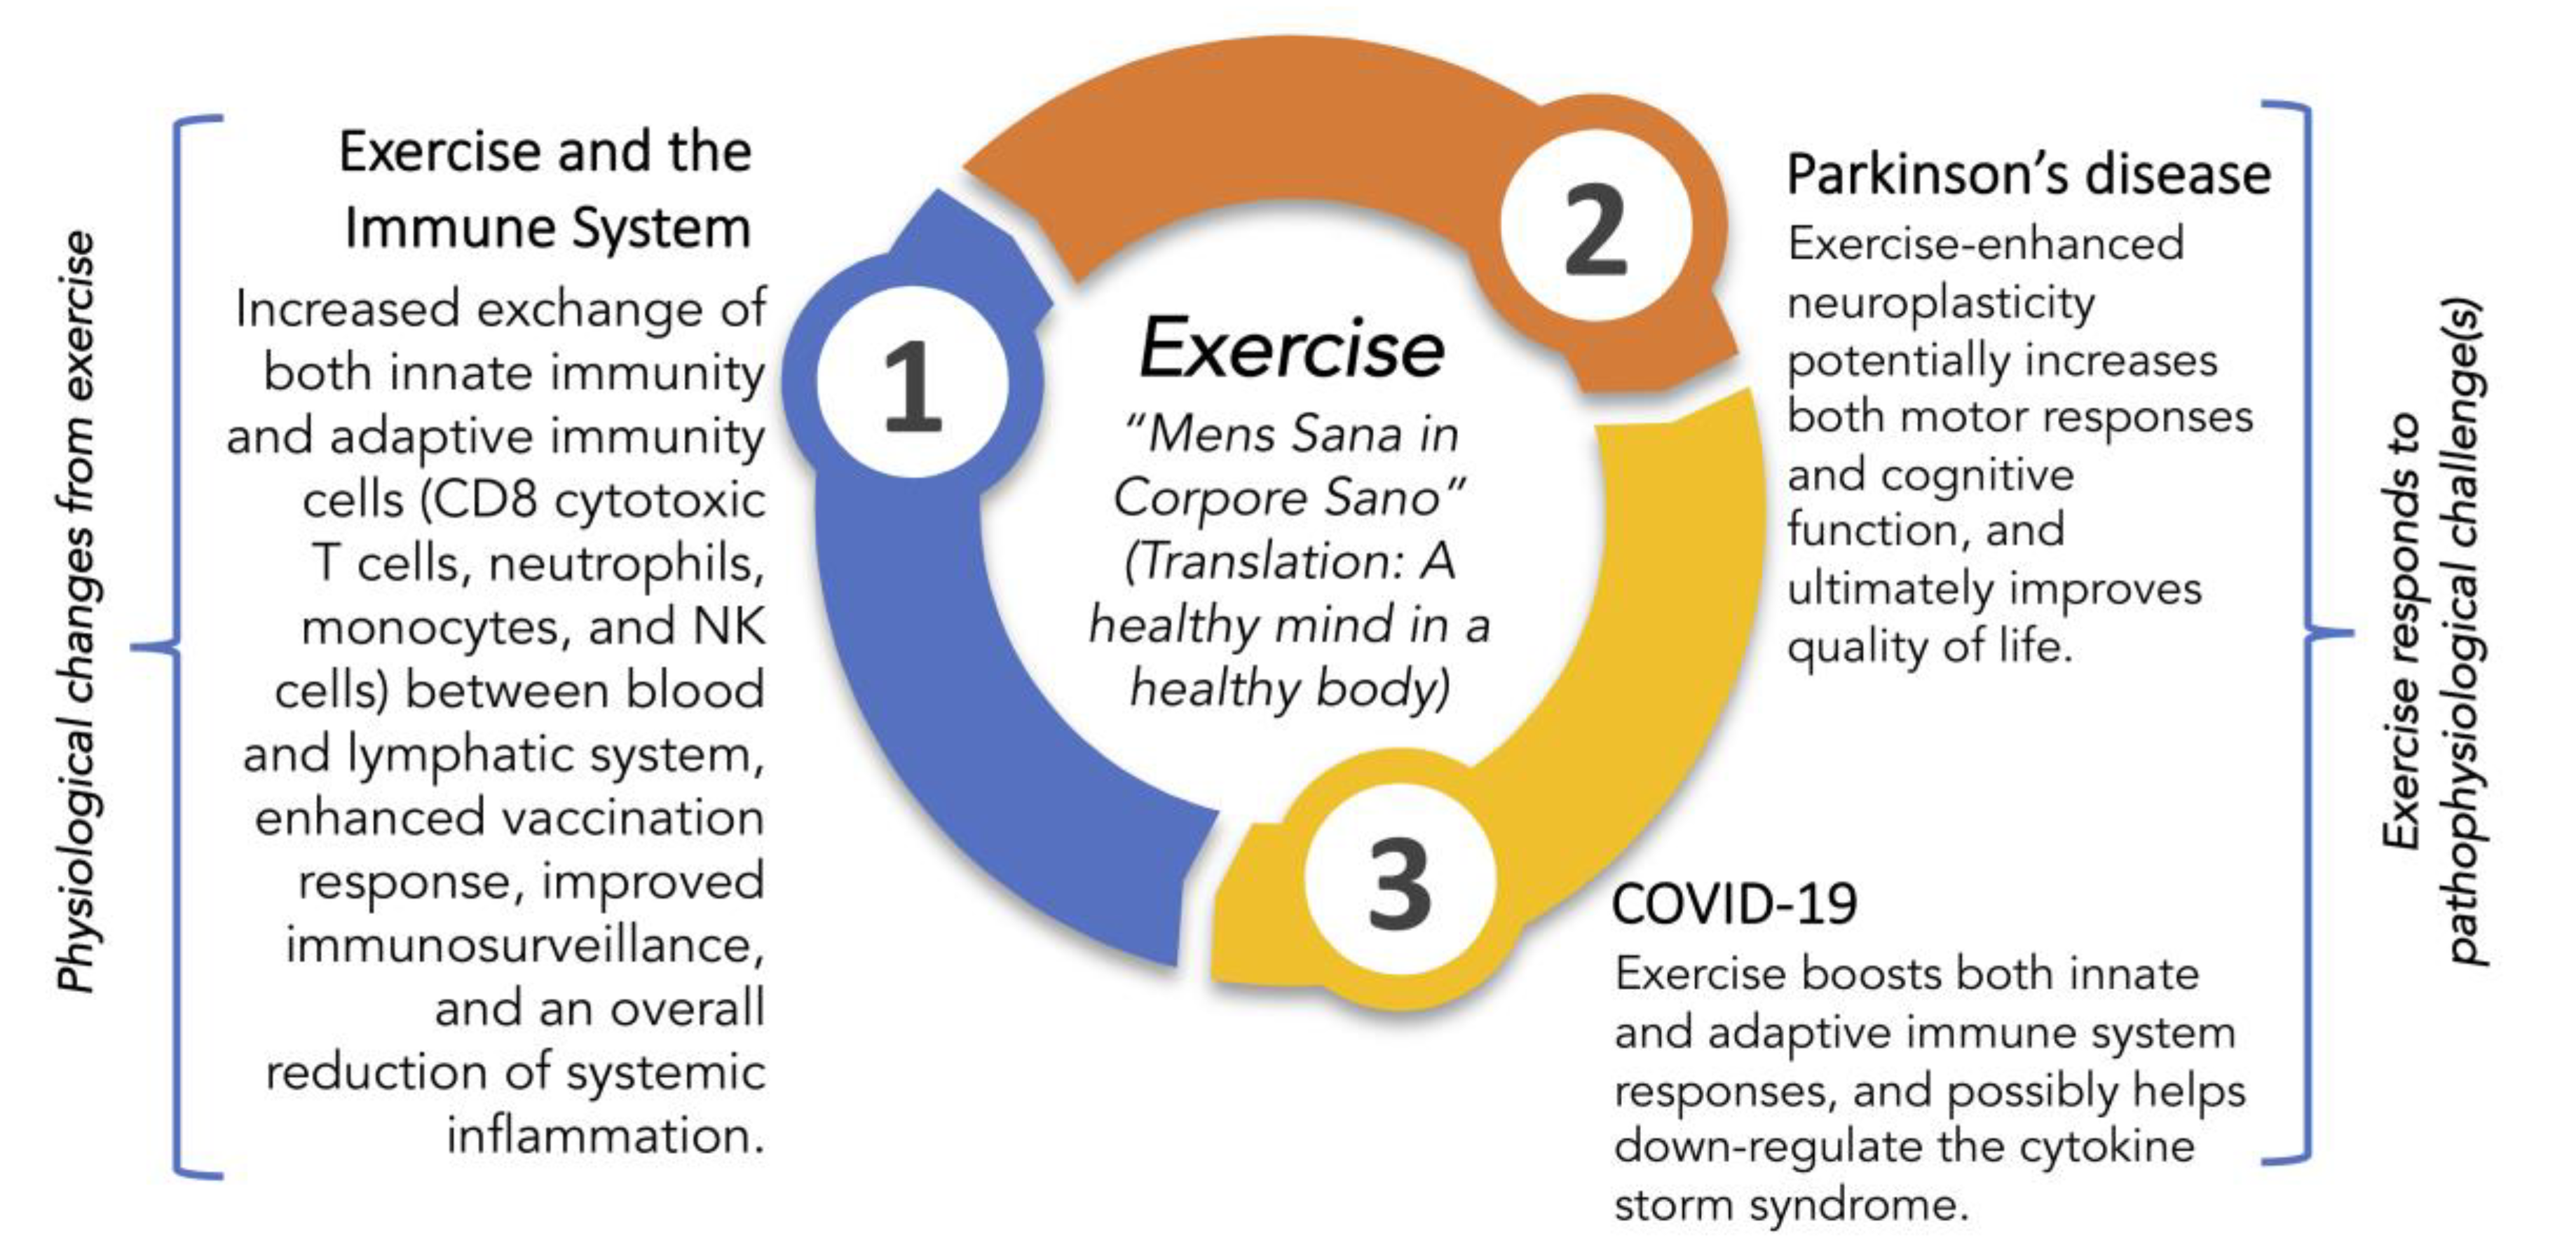 The Benefits of Exercise for Older Adults